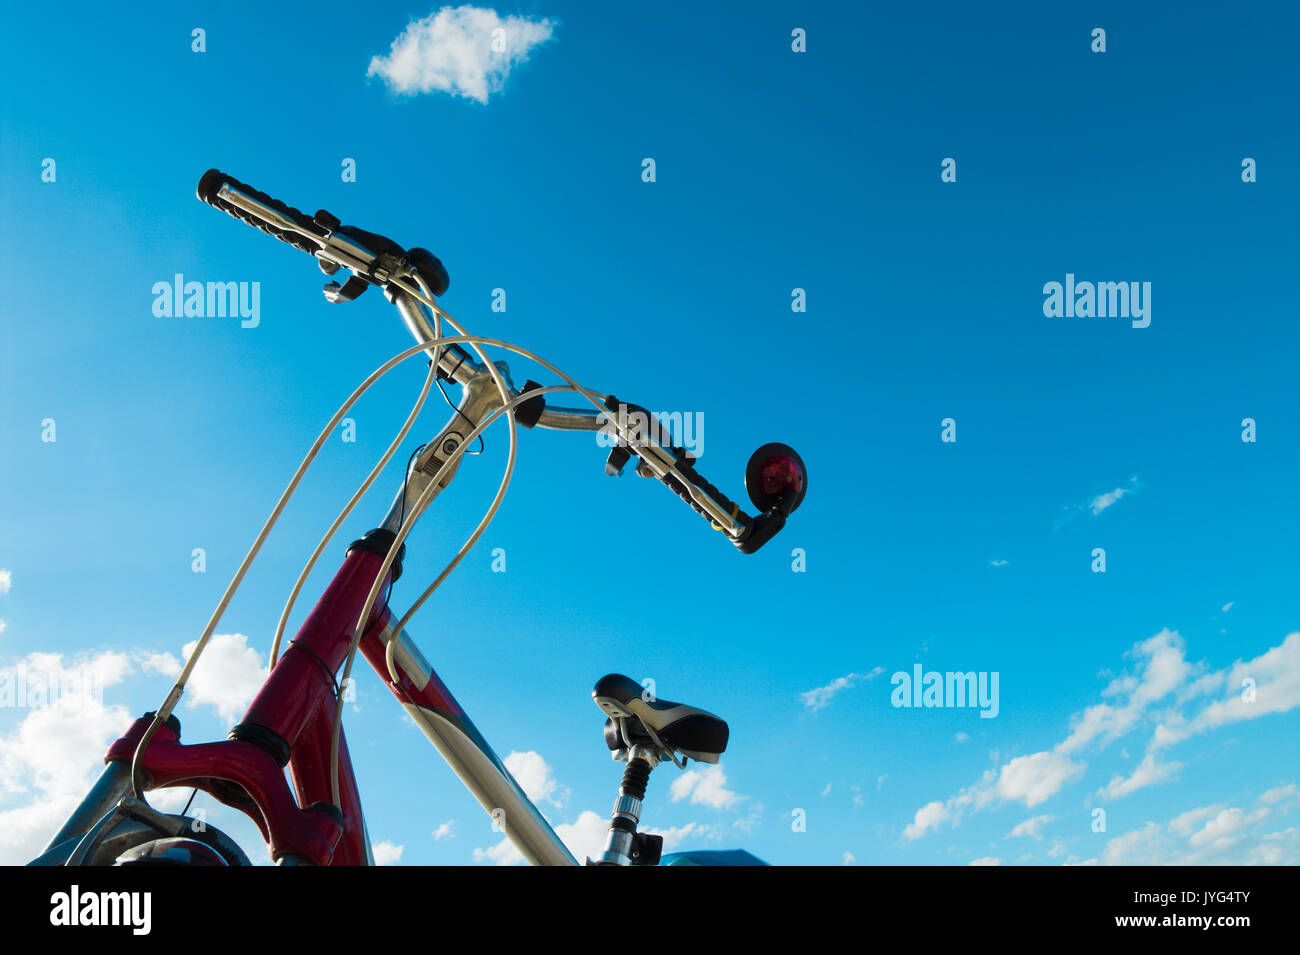 Bicycle upper part with handlebar and frame against blue sky. Bicycle tourism. Stock Photo